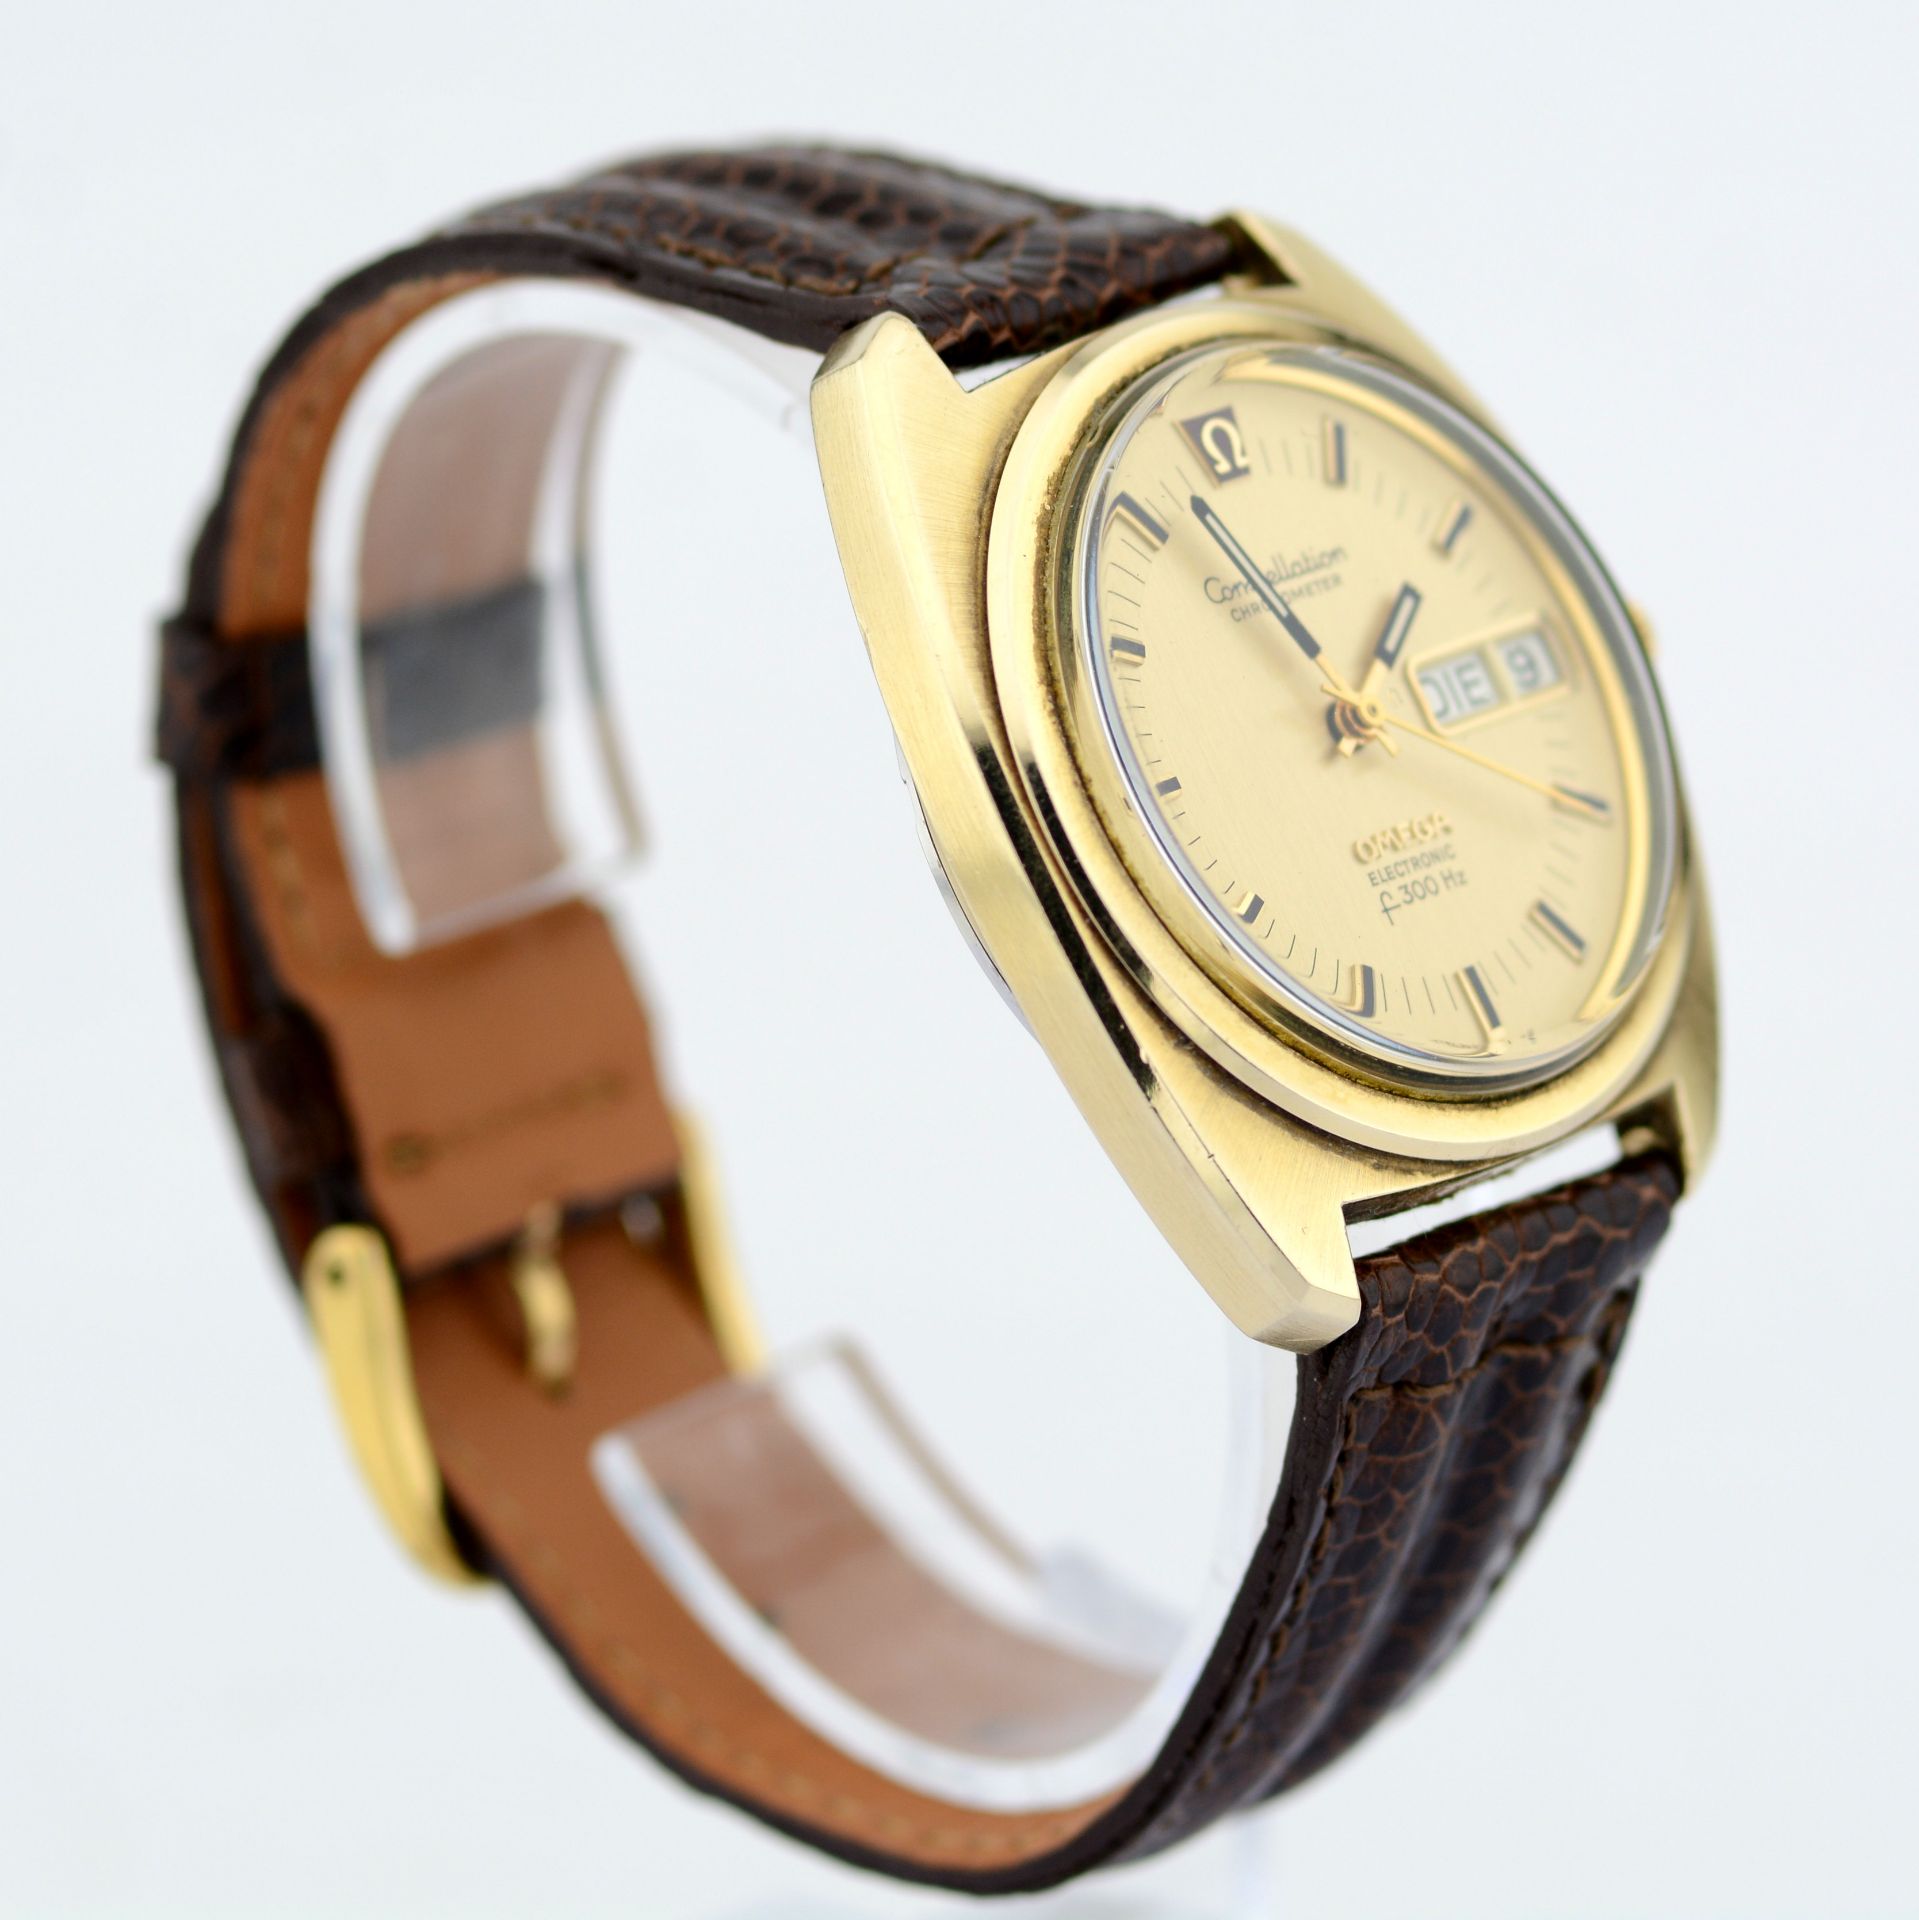 Omega / Constellation Chronometer Electronic F300 Day-Date - Gentlmen's Gold/Steel Wrist Watch - Image 4 of 8